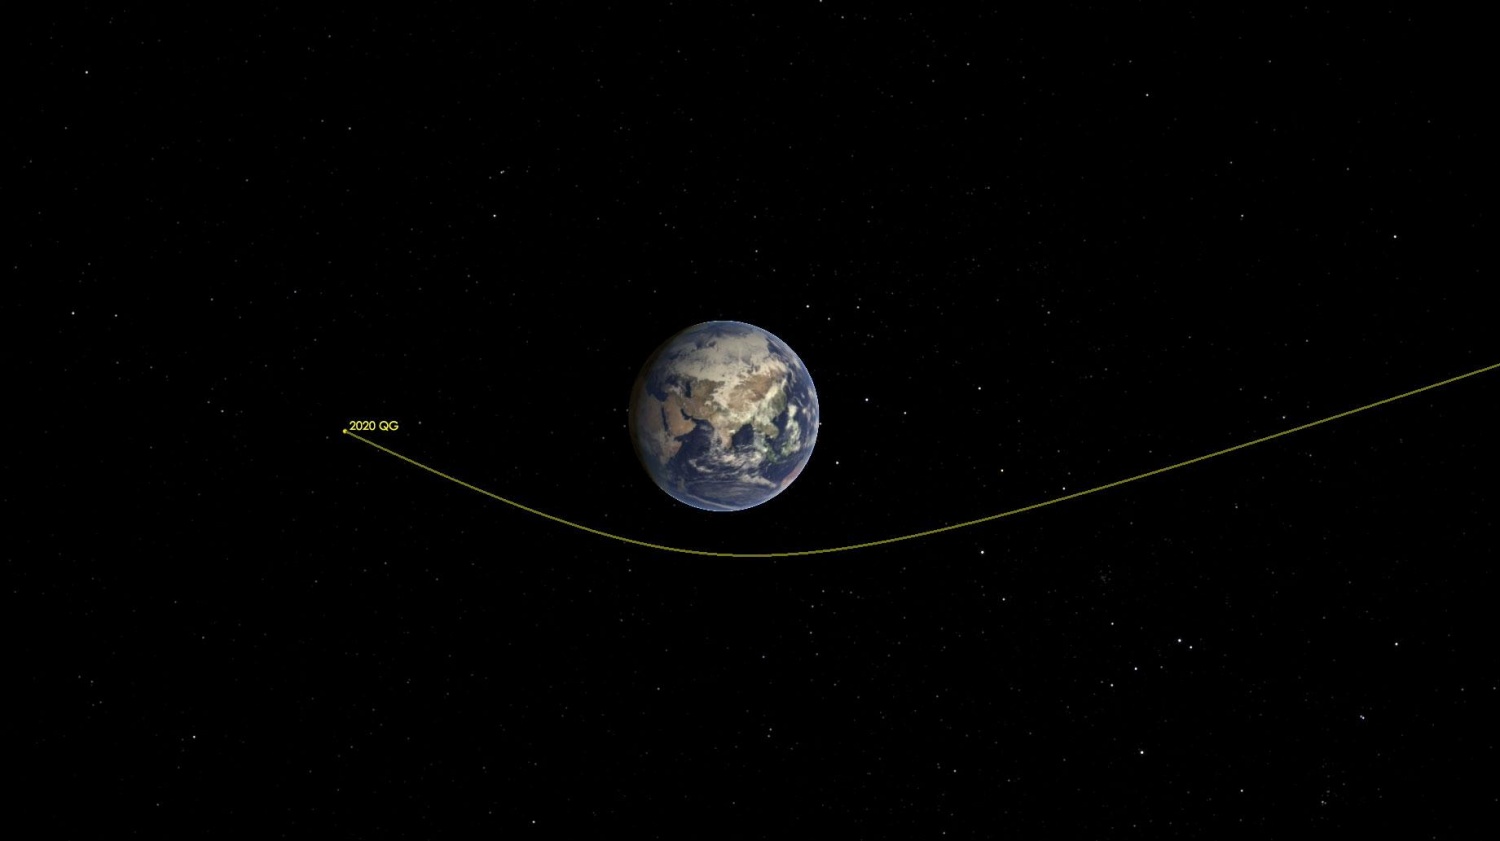 Asteroid 2020 QG Zips Around the Earth (Illustration)